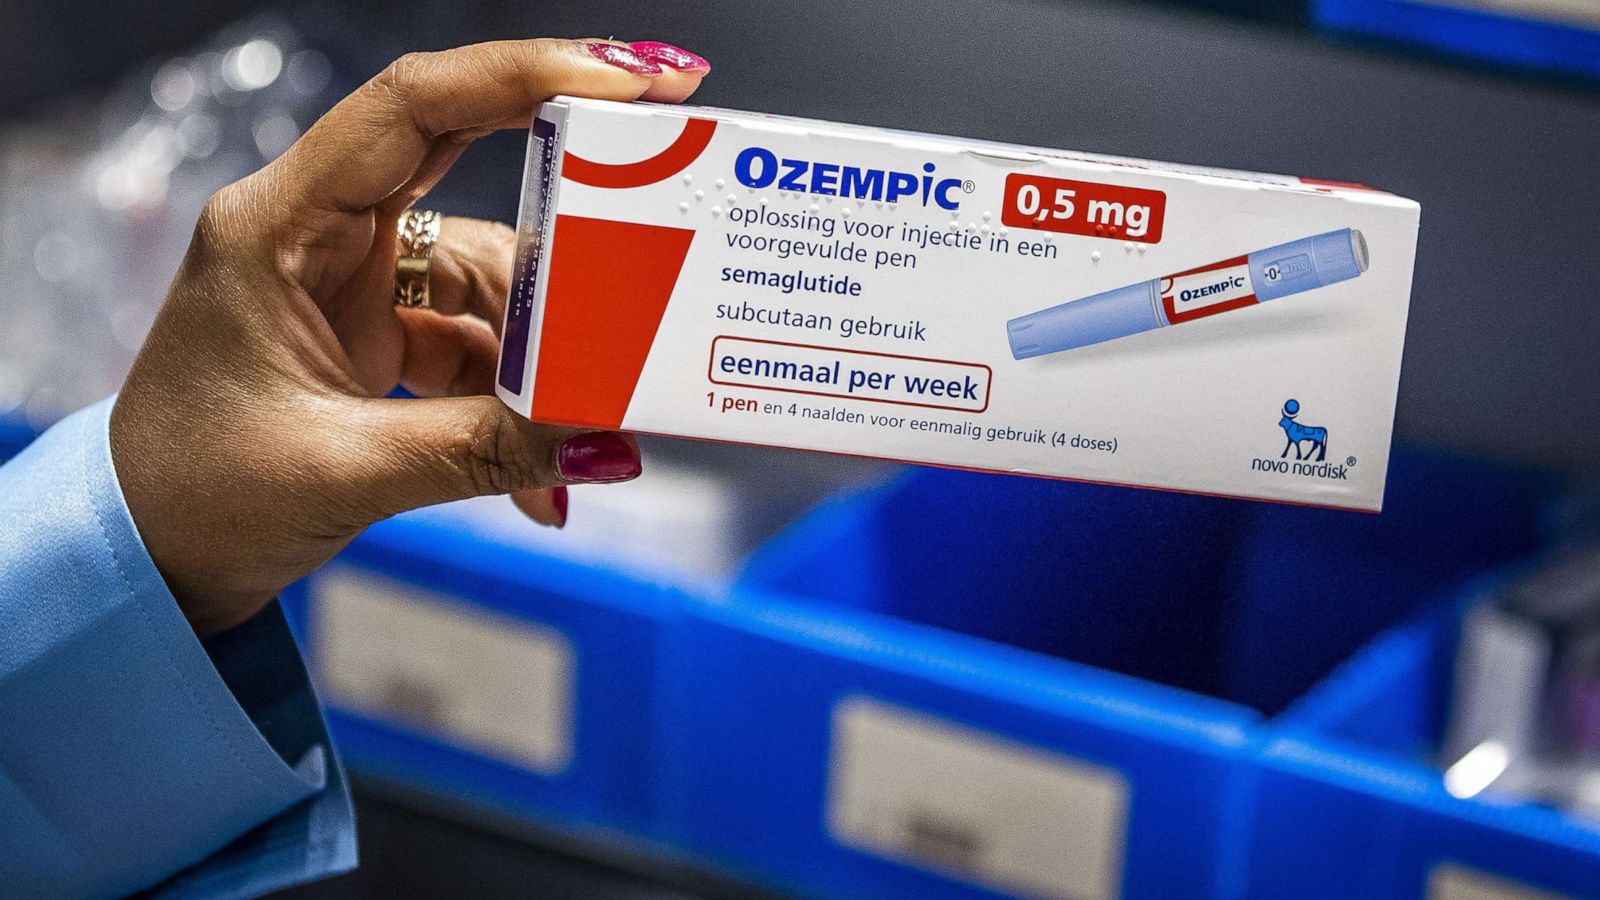 Ozempic: For weight loss, dosage, side effects, and more